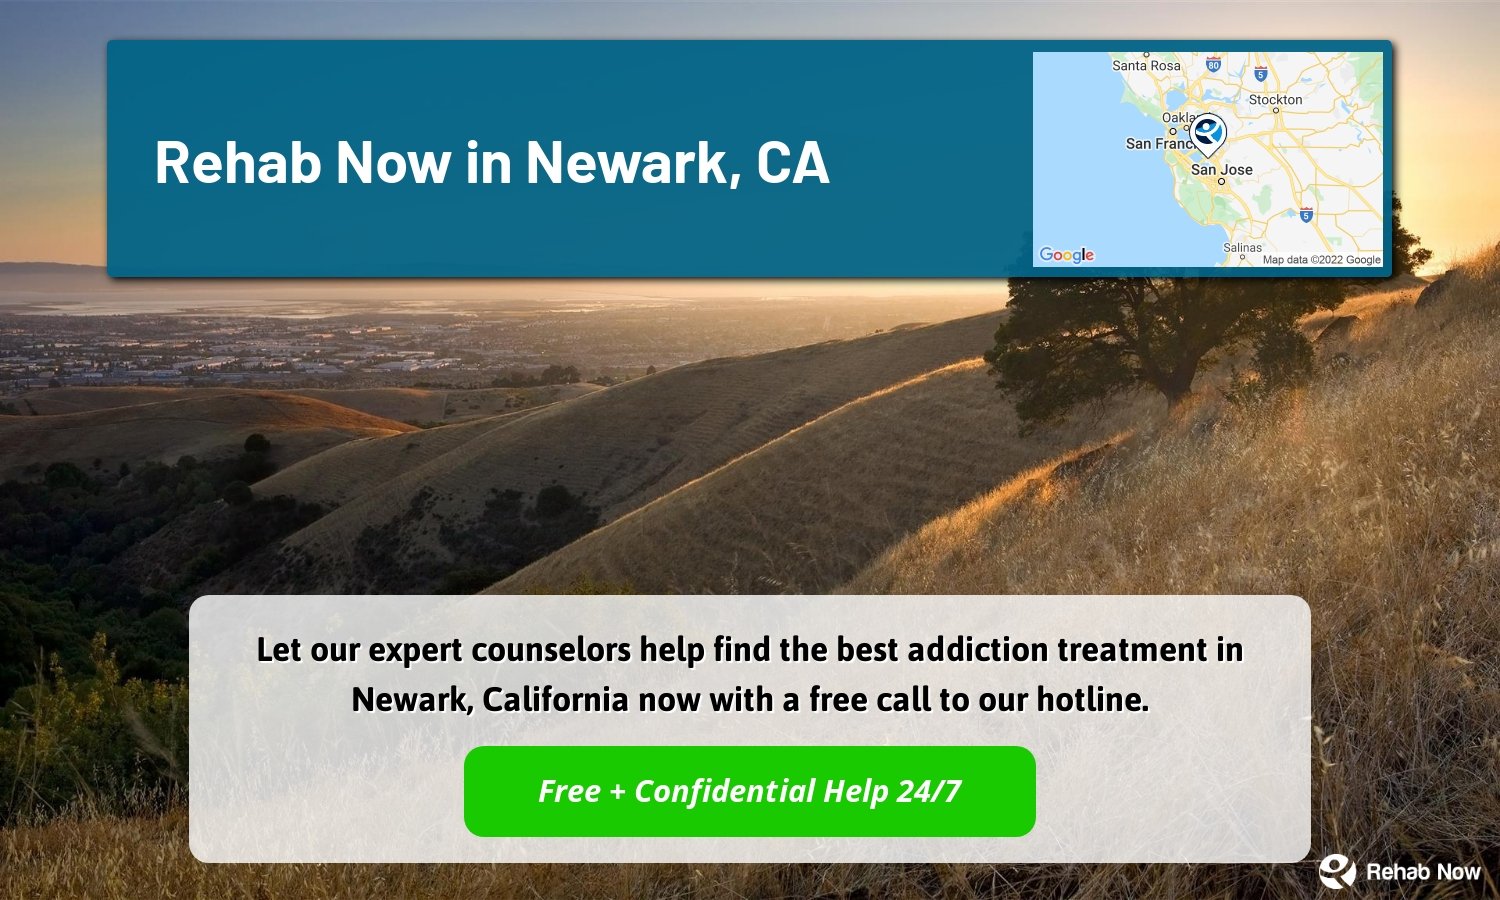 Let our expert counselors help find the best addiction treatment in Newark, California now with a free call to our hotline.